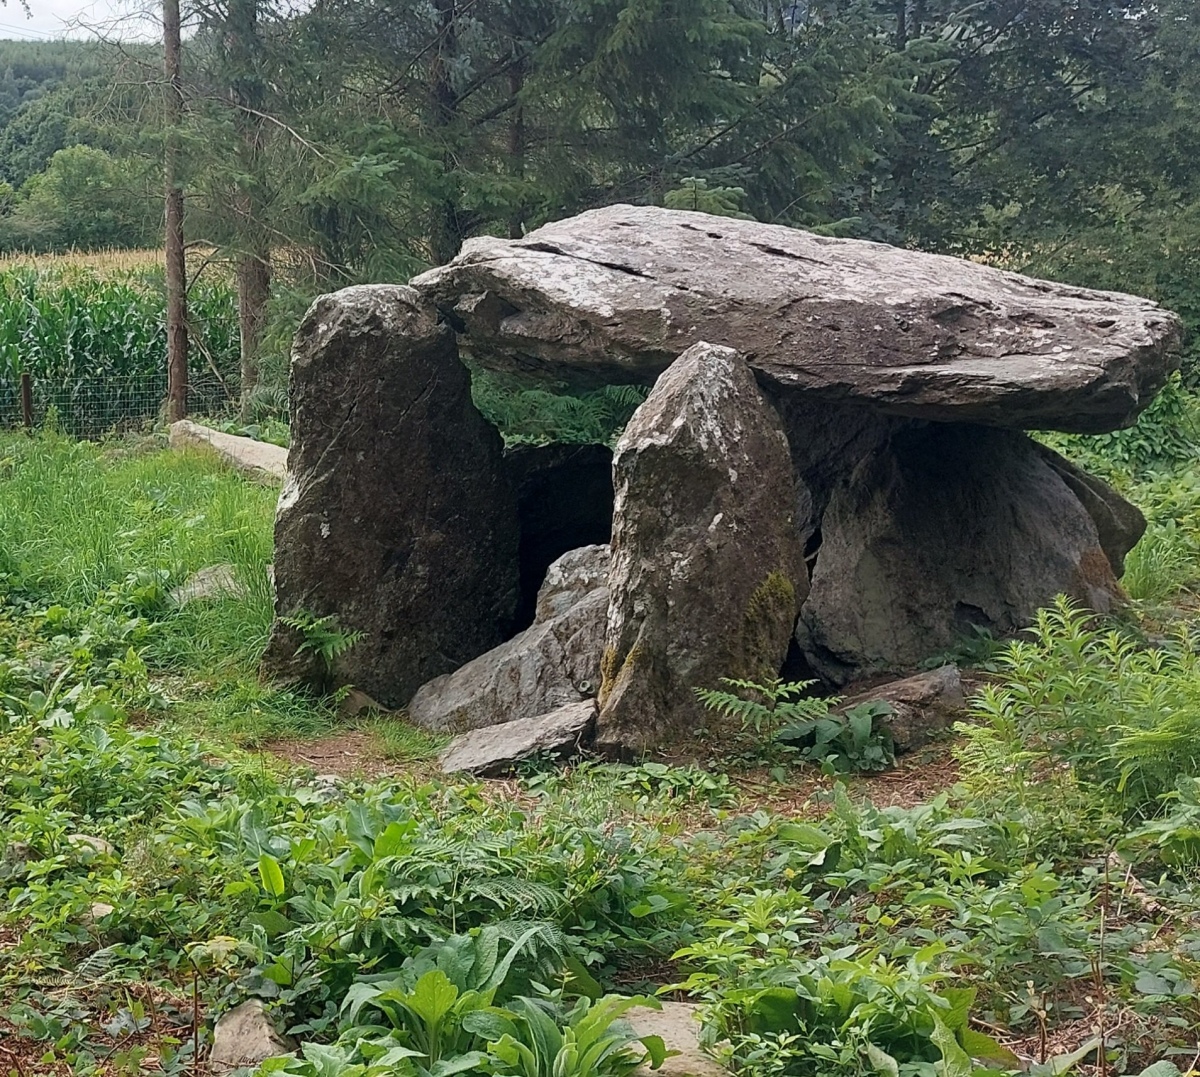 The Neolithic portal tomb at Ballybrittas, Wexford which is once more open to the public. Open all year round via a walking trail off Bree Hill  
Photo credit: Irish Archaeology @irarchaeology on Twitter 